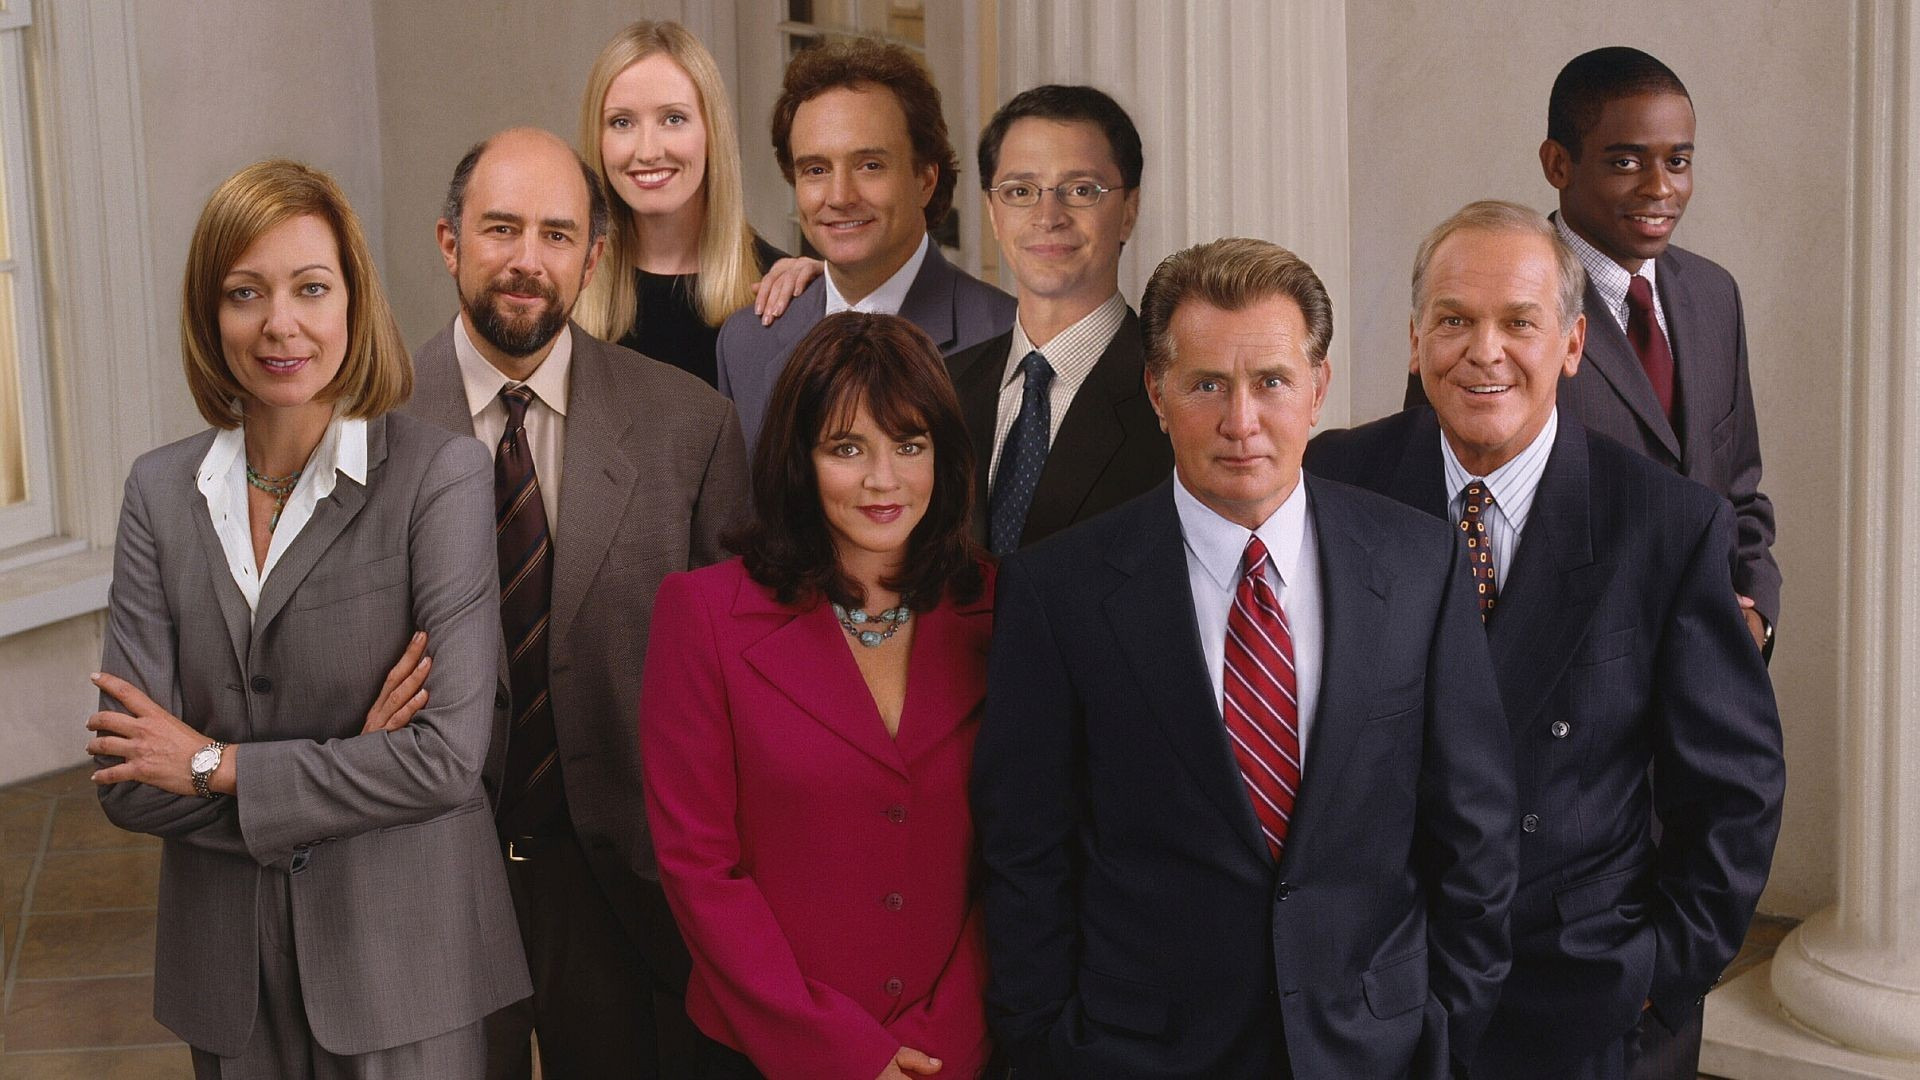 Show The West Wing